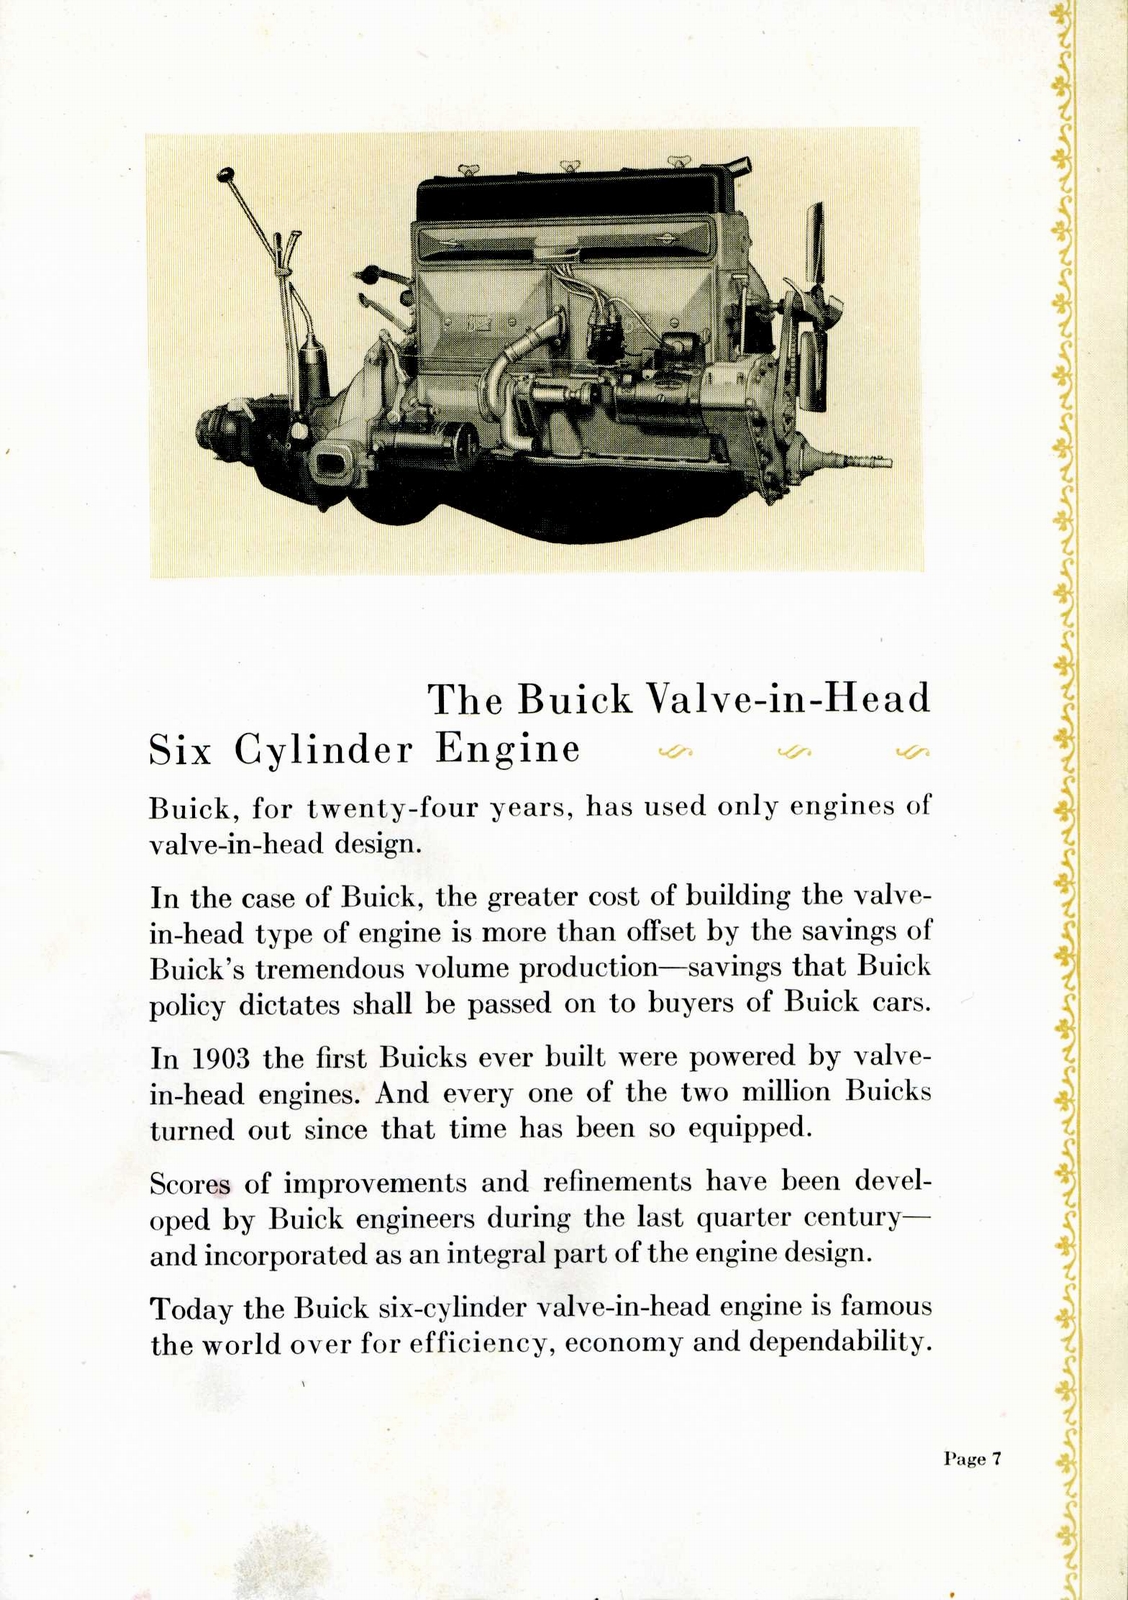 n_1928 Buick-How to Choose a Motor Car Wisely-07.jpg